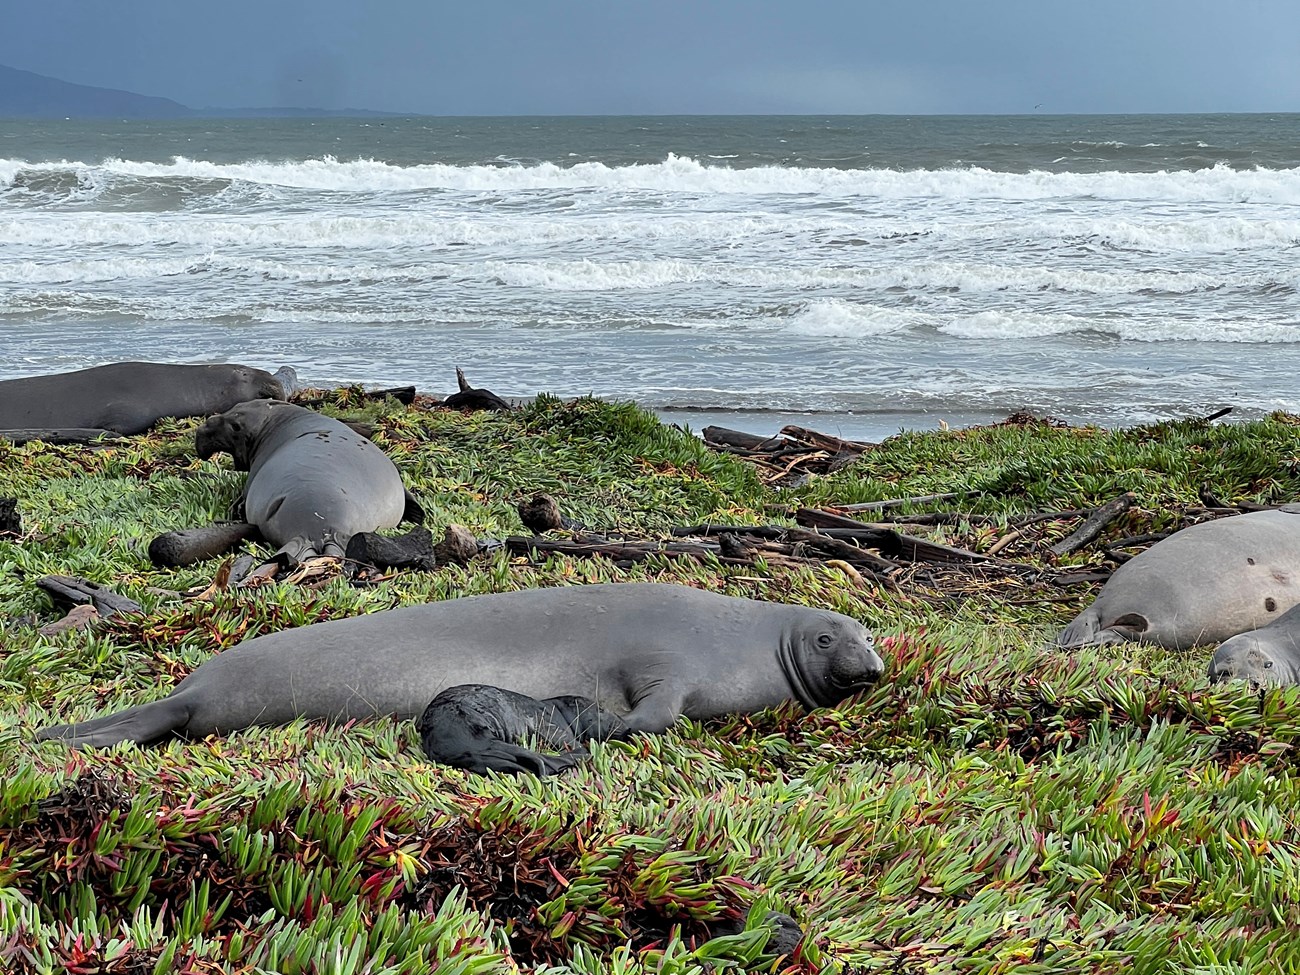 A female seal and her black pup lay on a carpet of green ice plant. Three other females are behind them, and behond them all, waves crash on the beach beneath a moody gray sky.